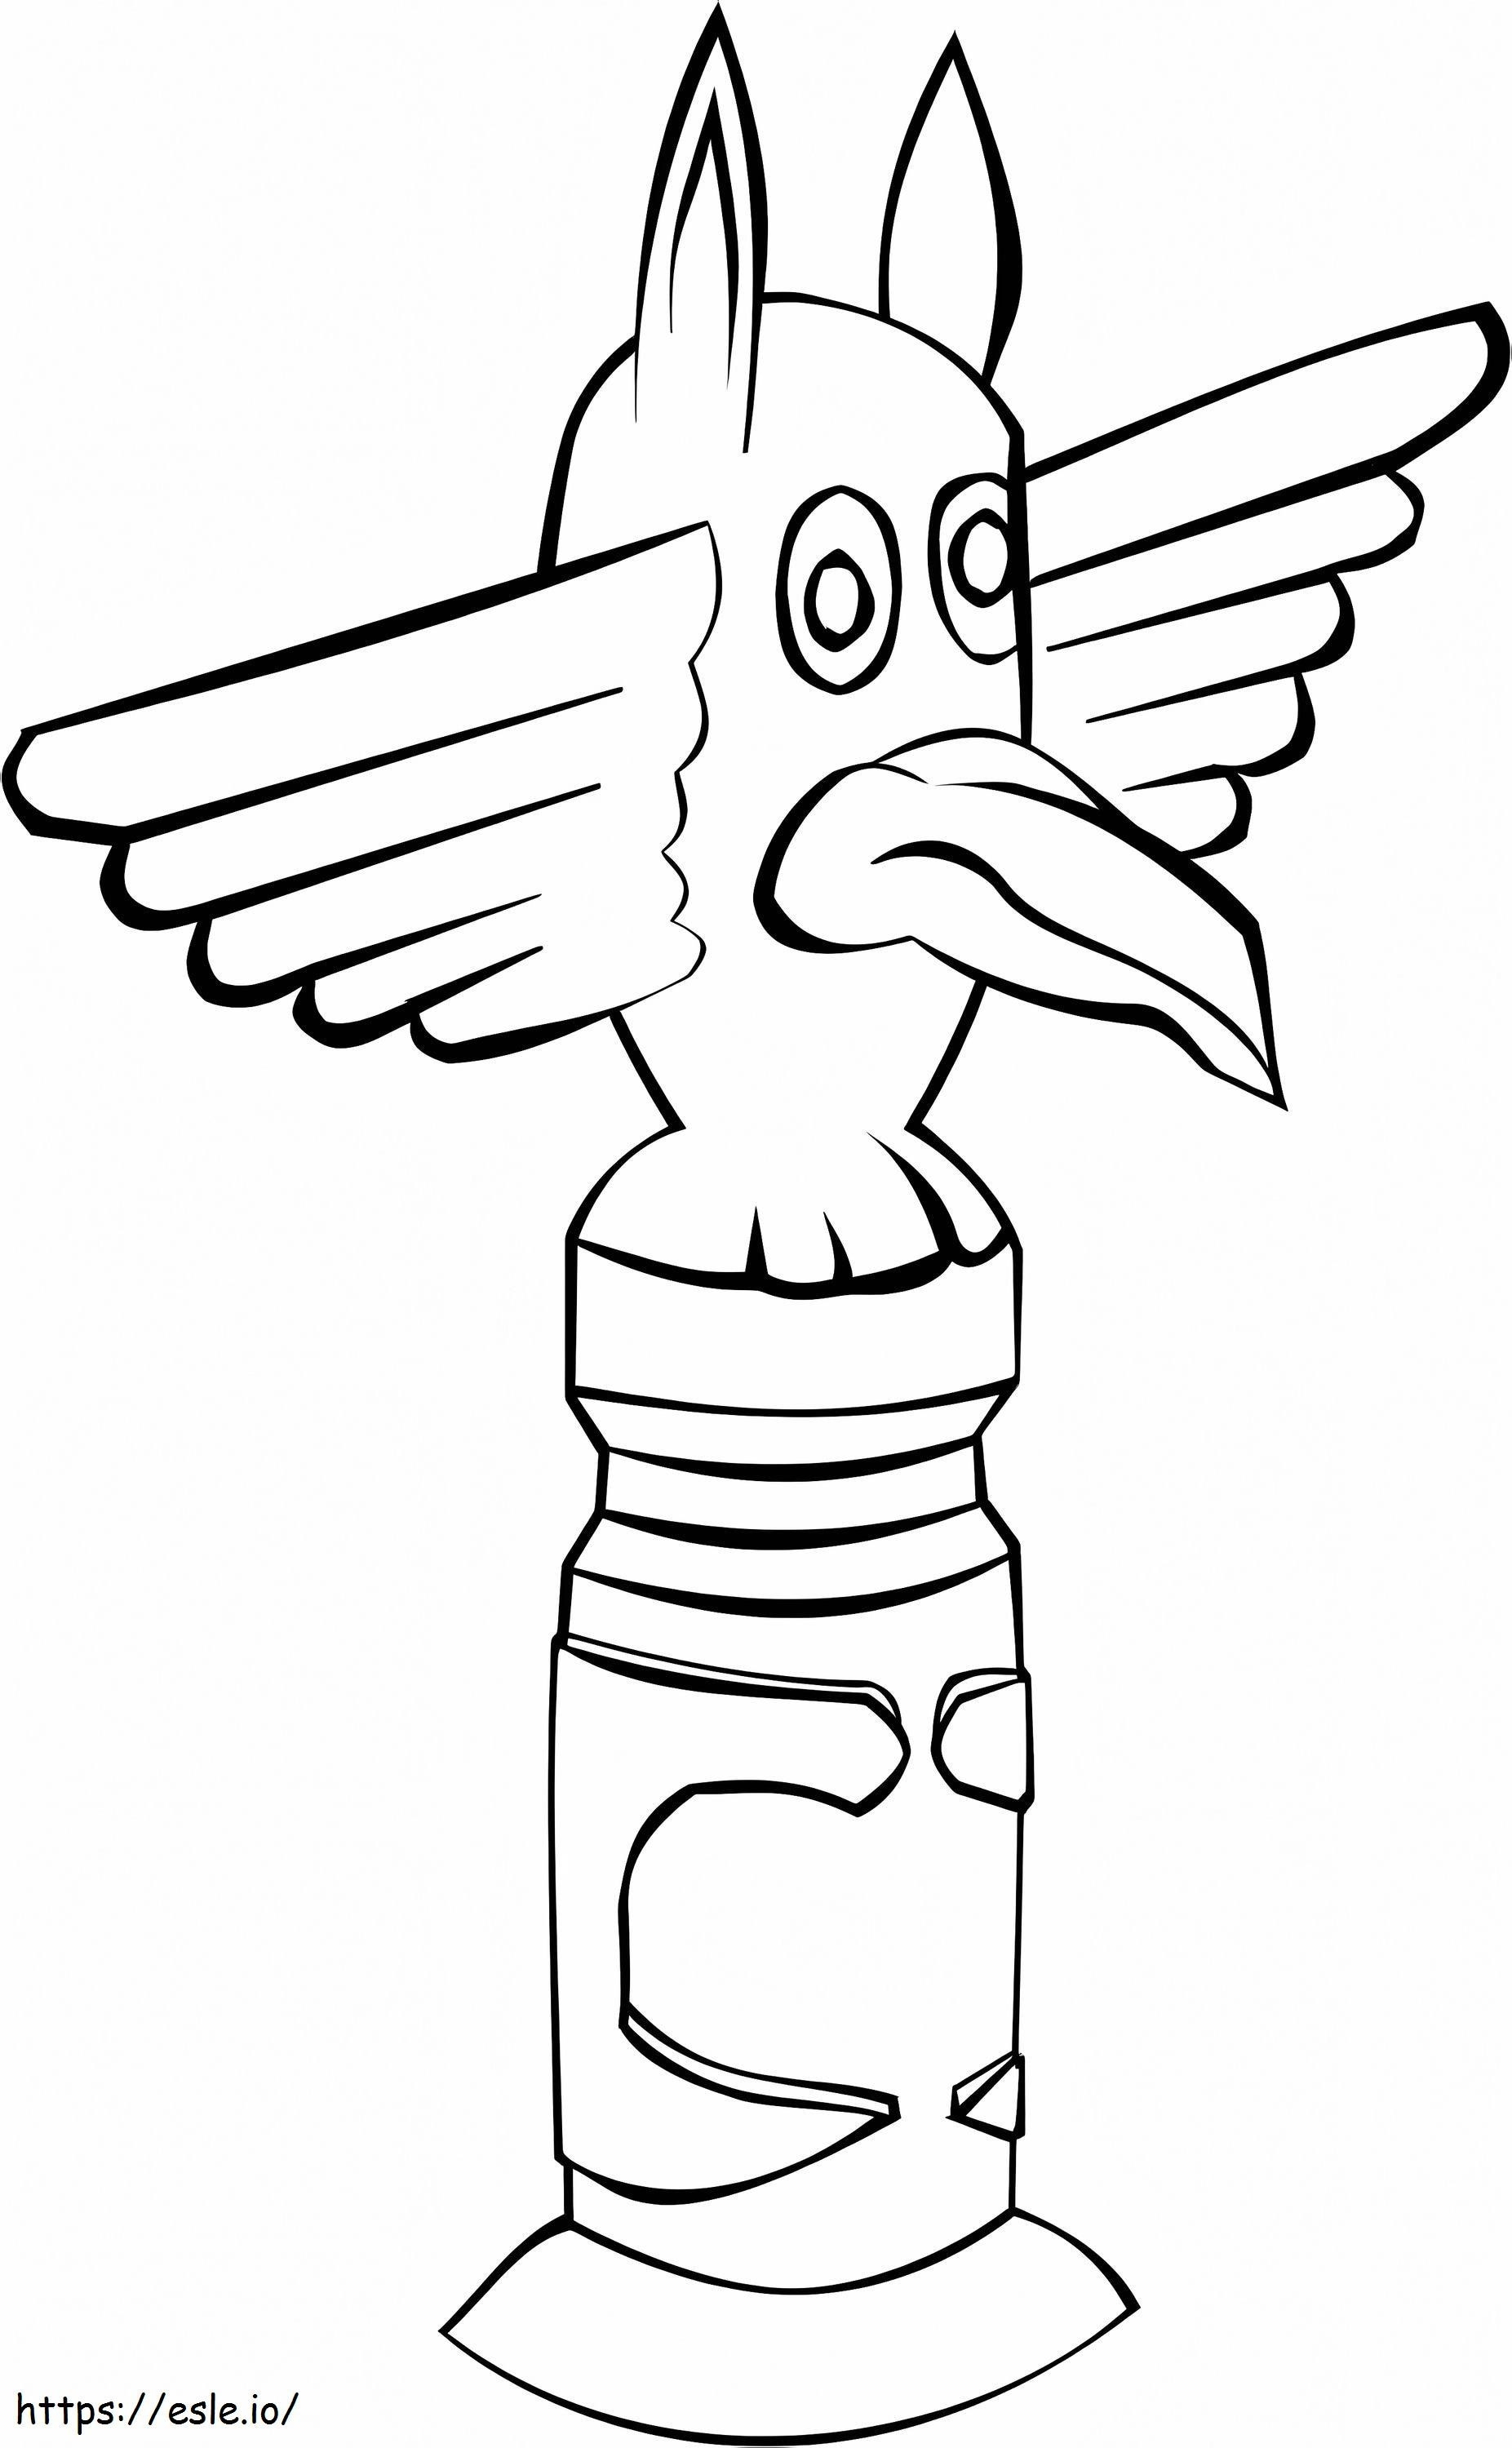 Ward Field 7 coloring page